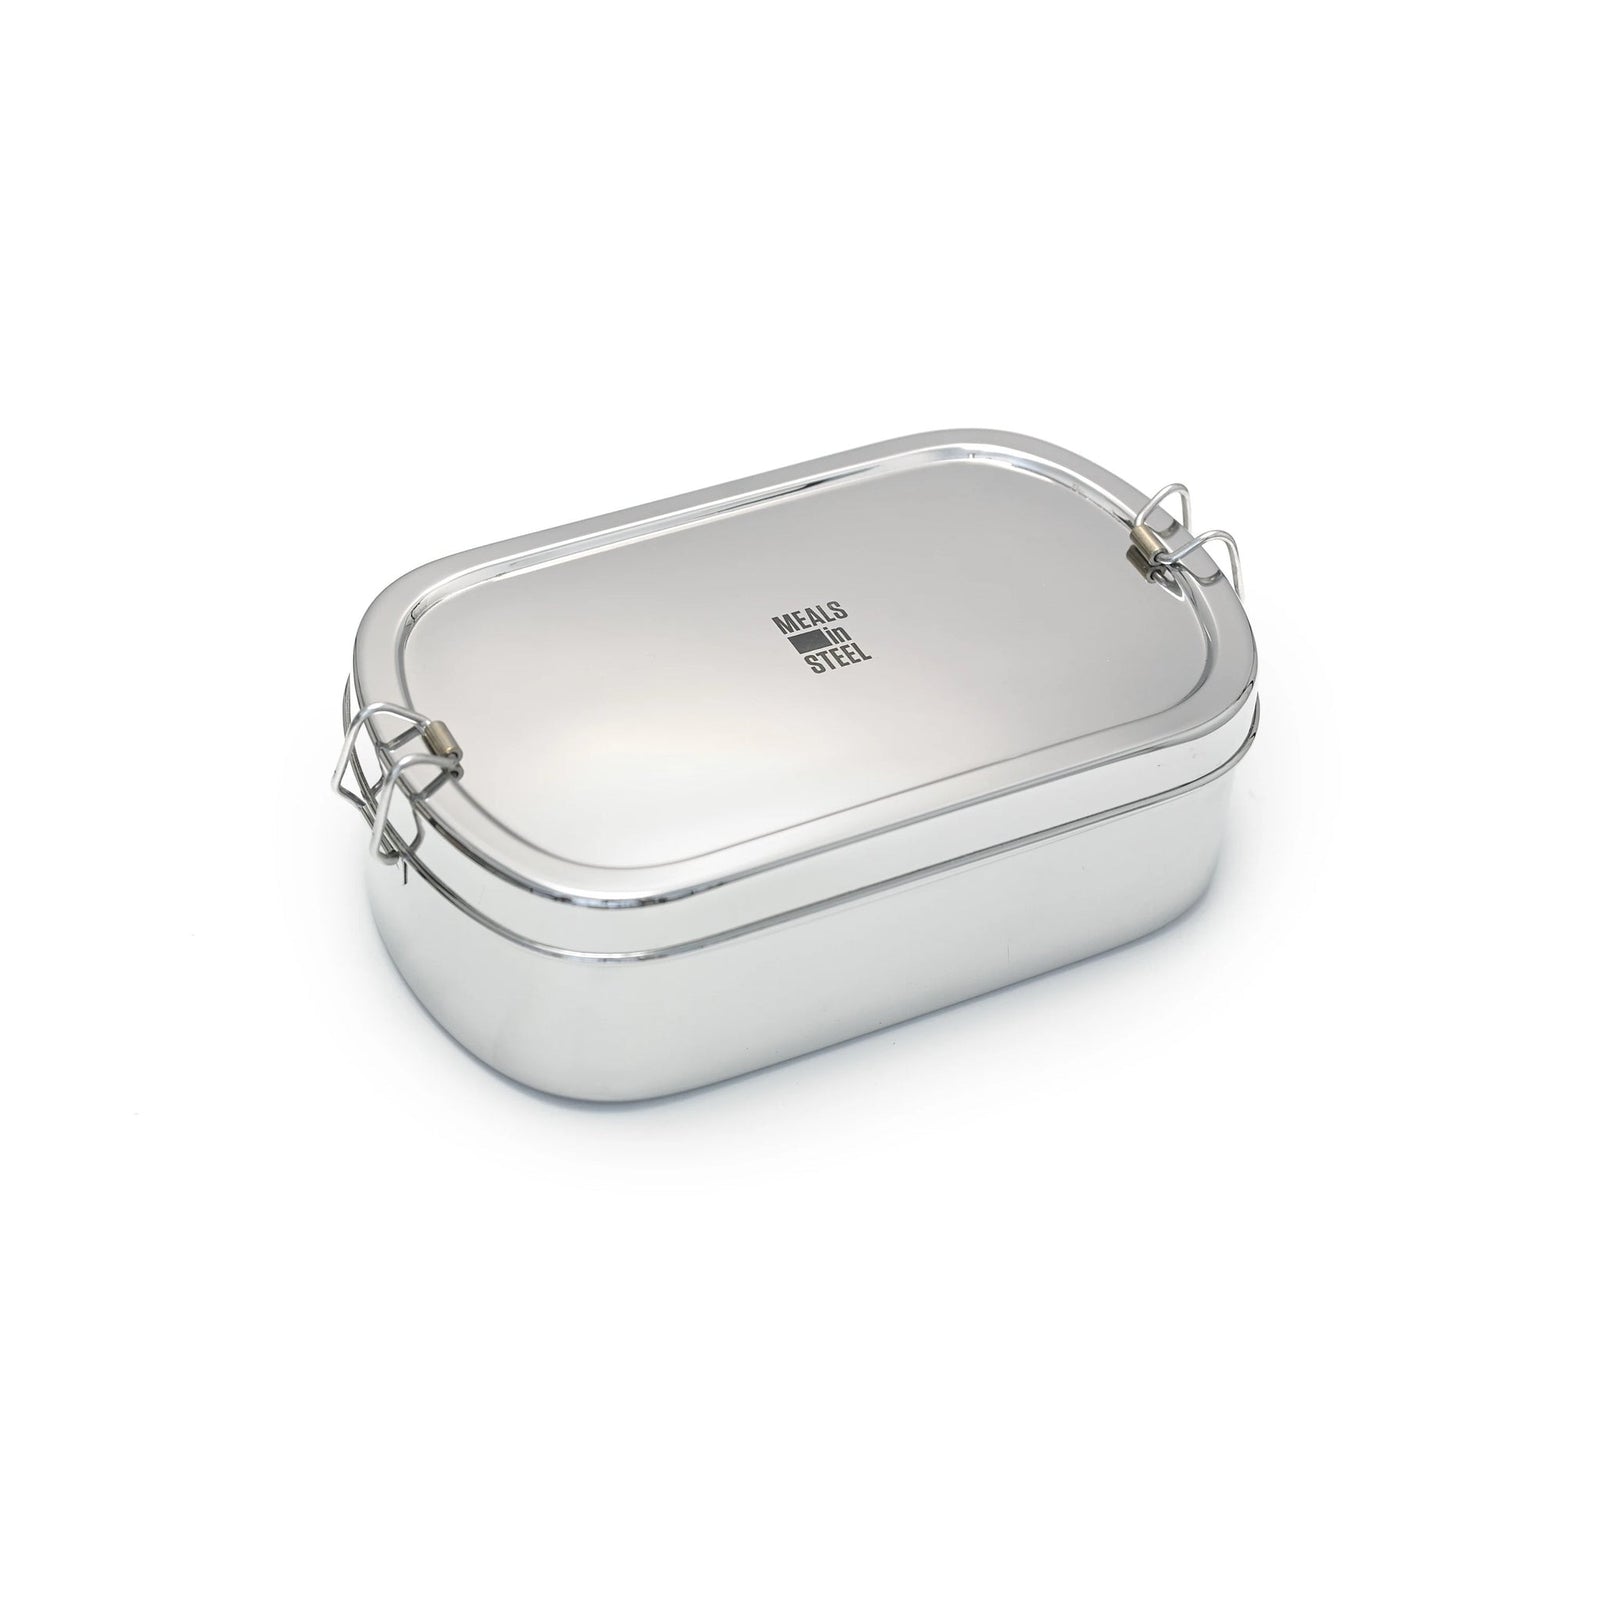 large-oval-lunchbox-707135_1024x1024@2x